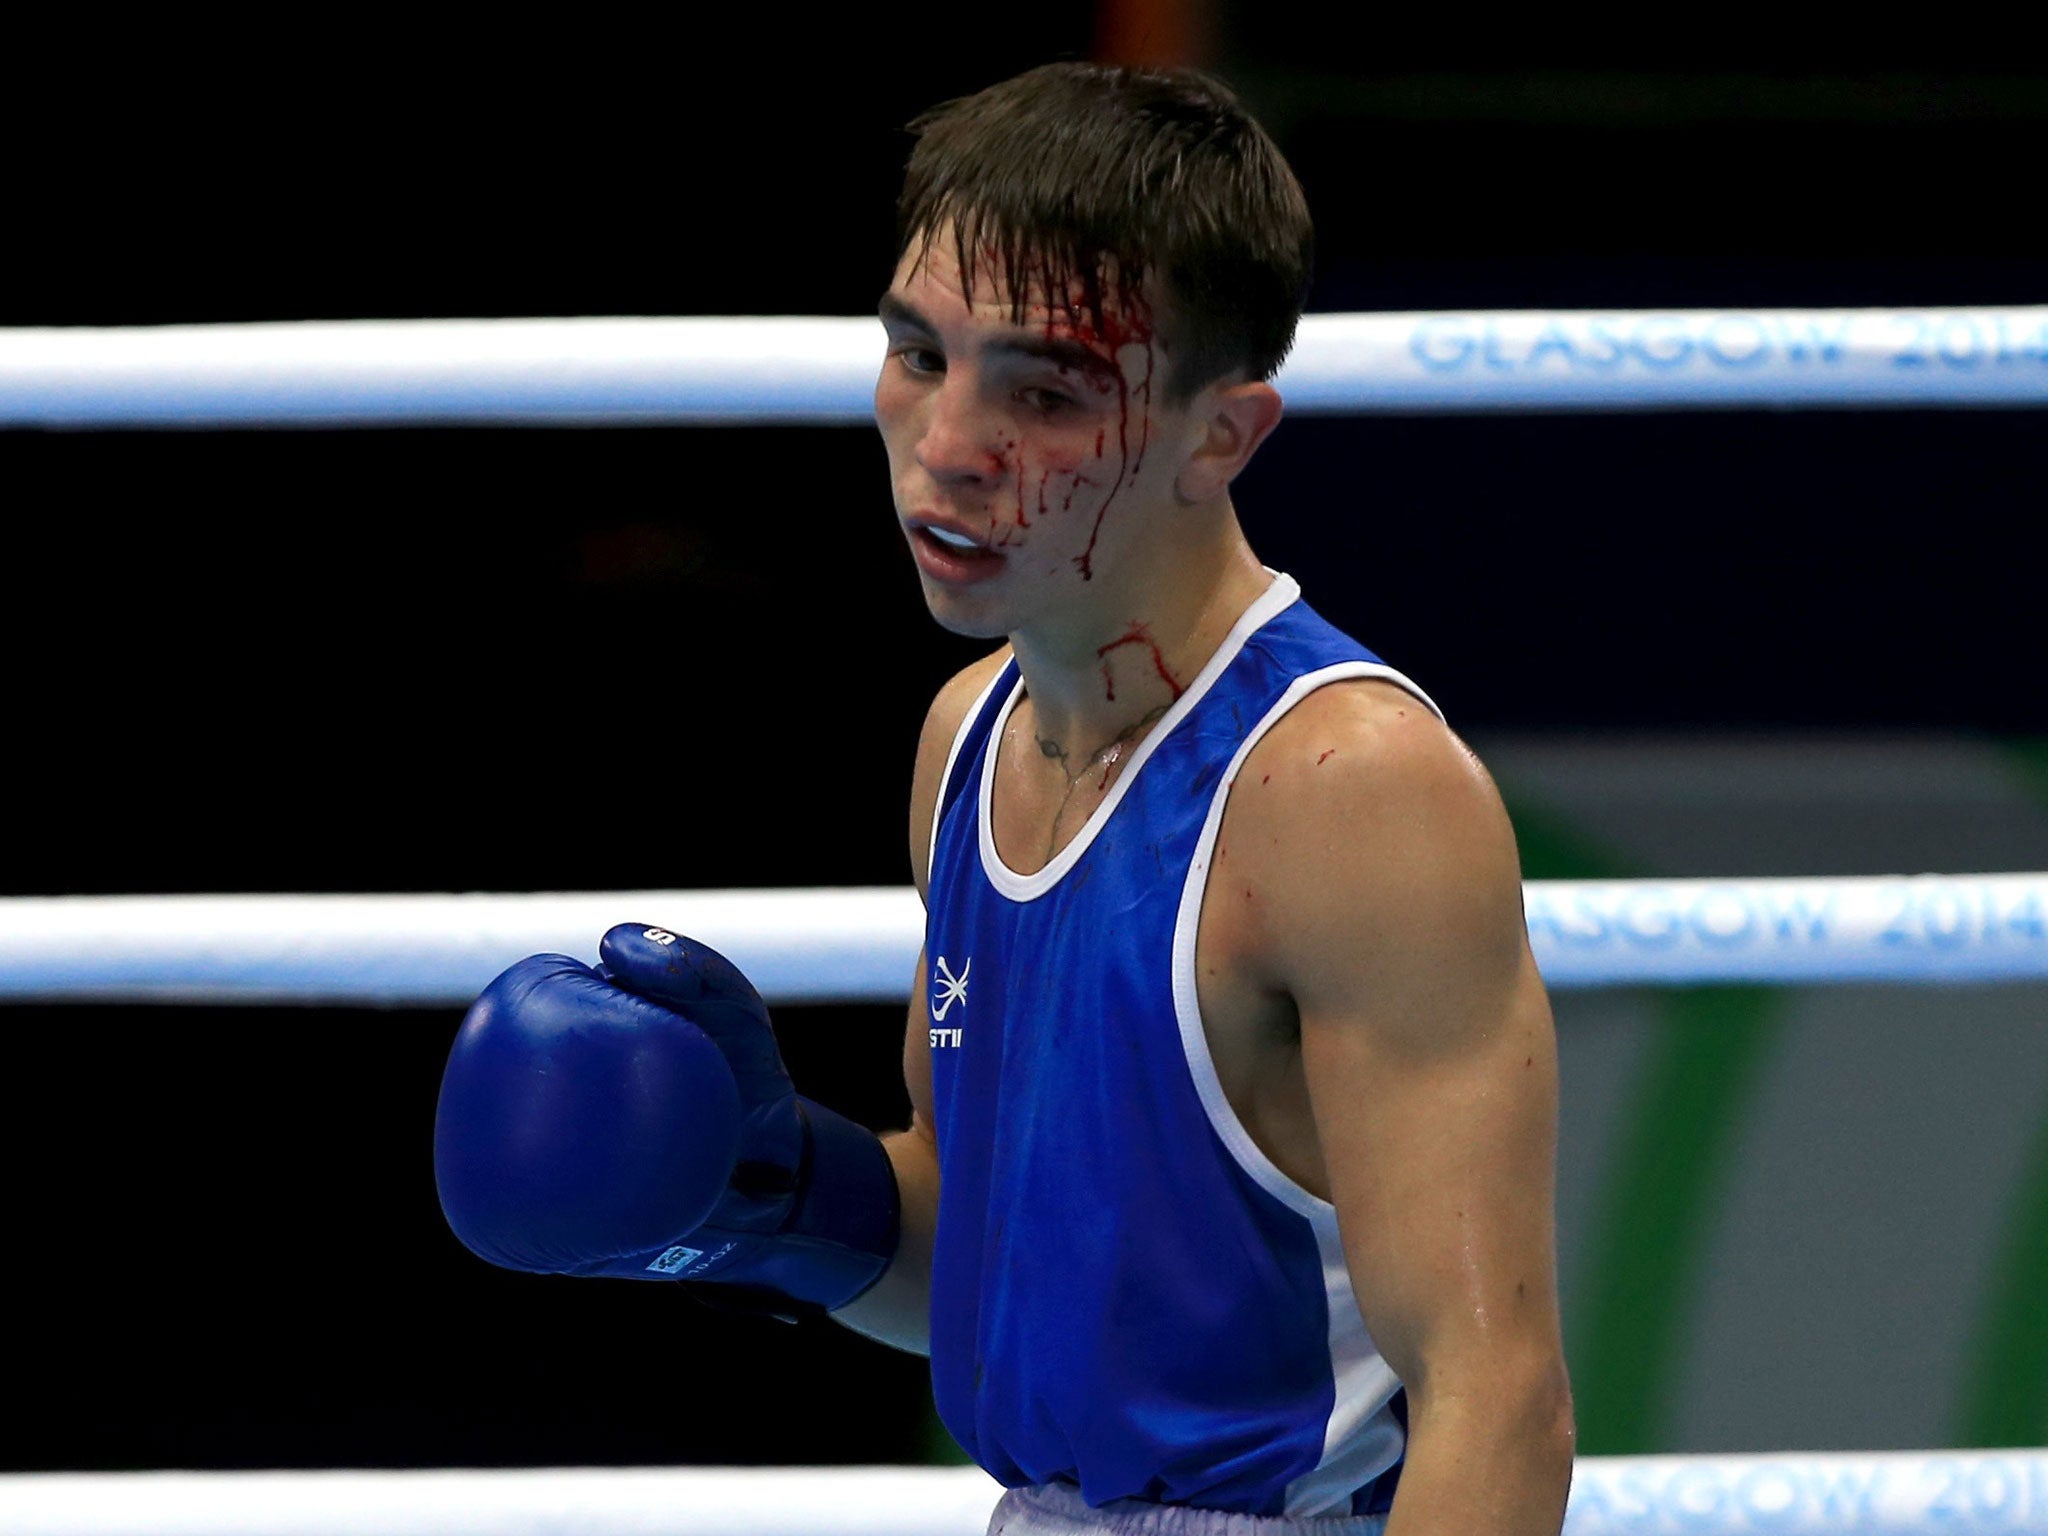 Commonwealth Games Blood flows in scary boxing fights without headguards The Independent The Independent